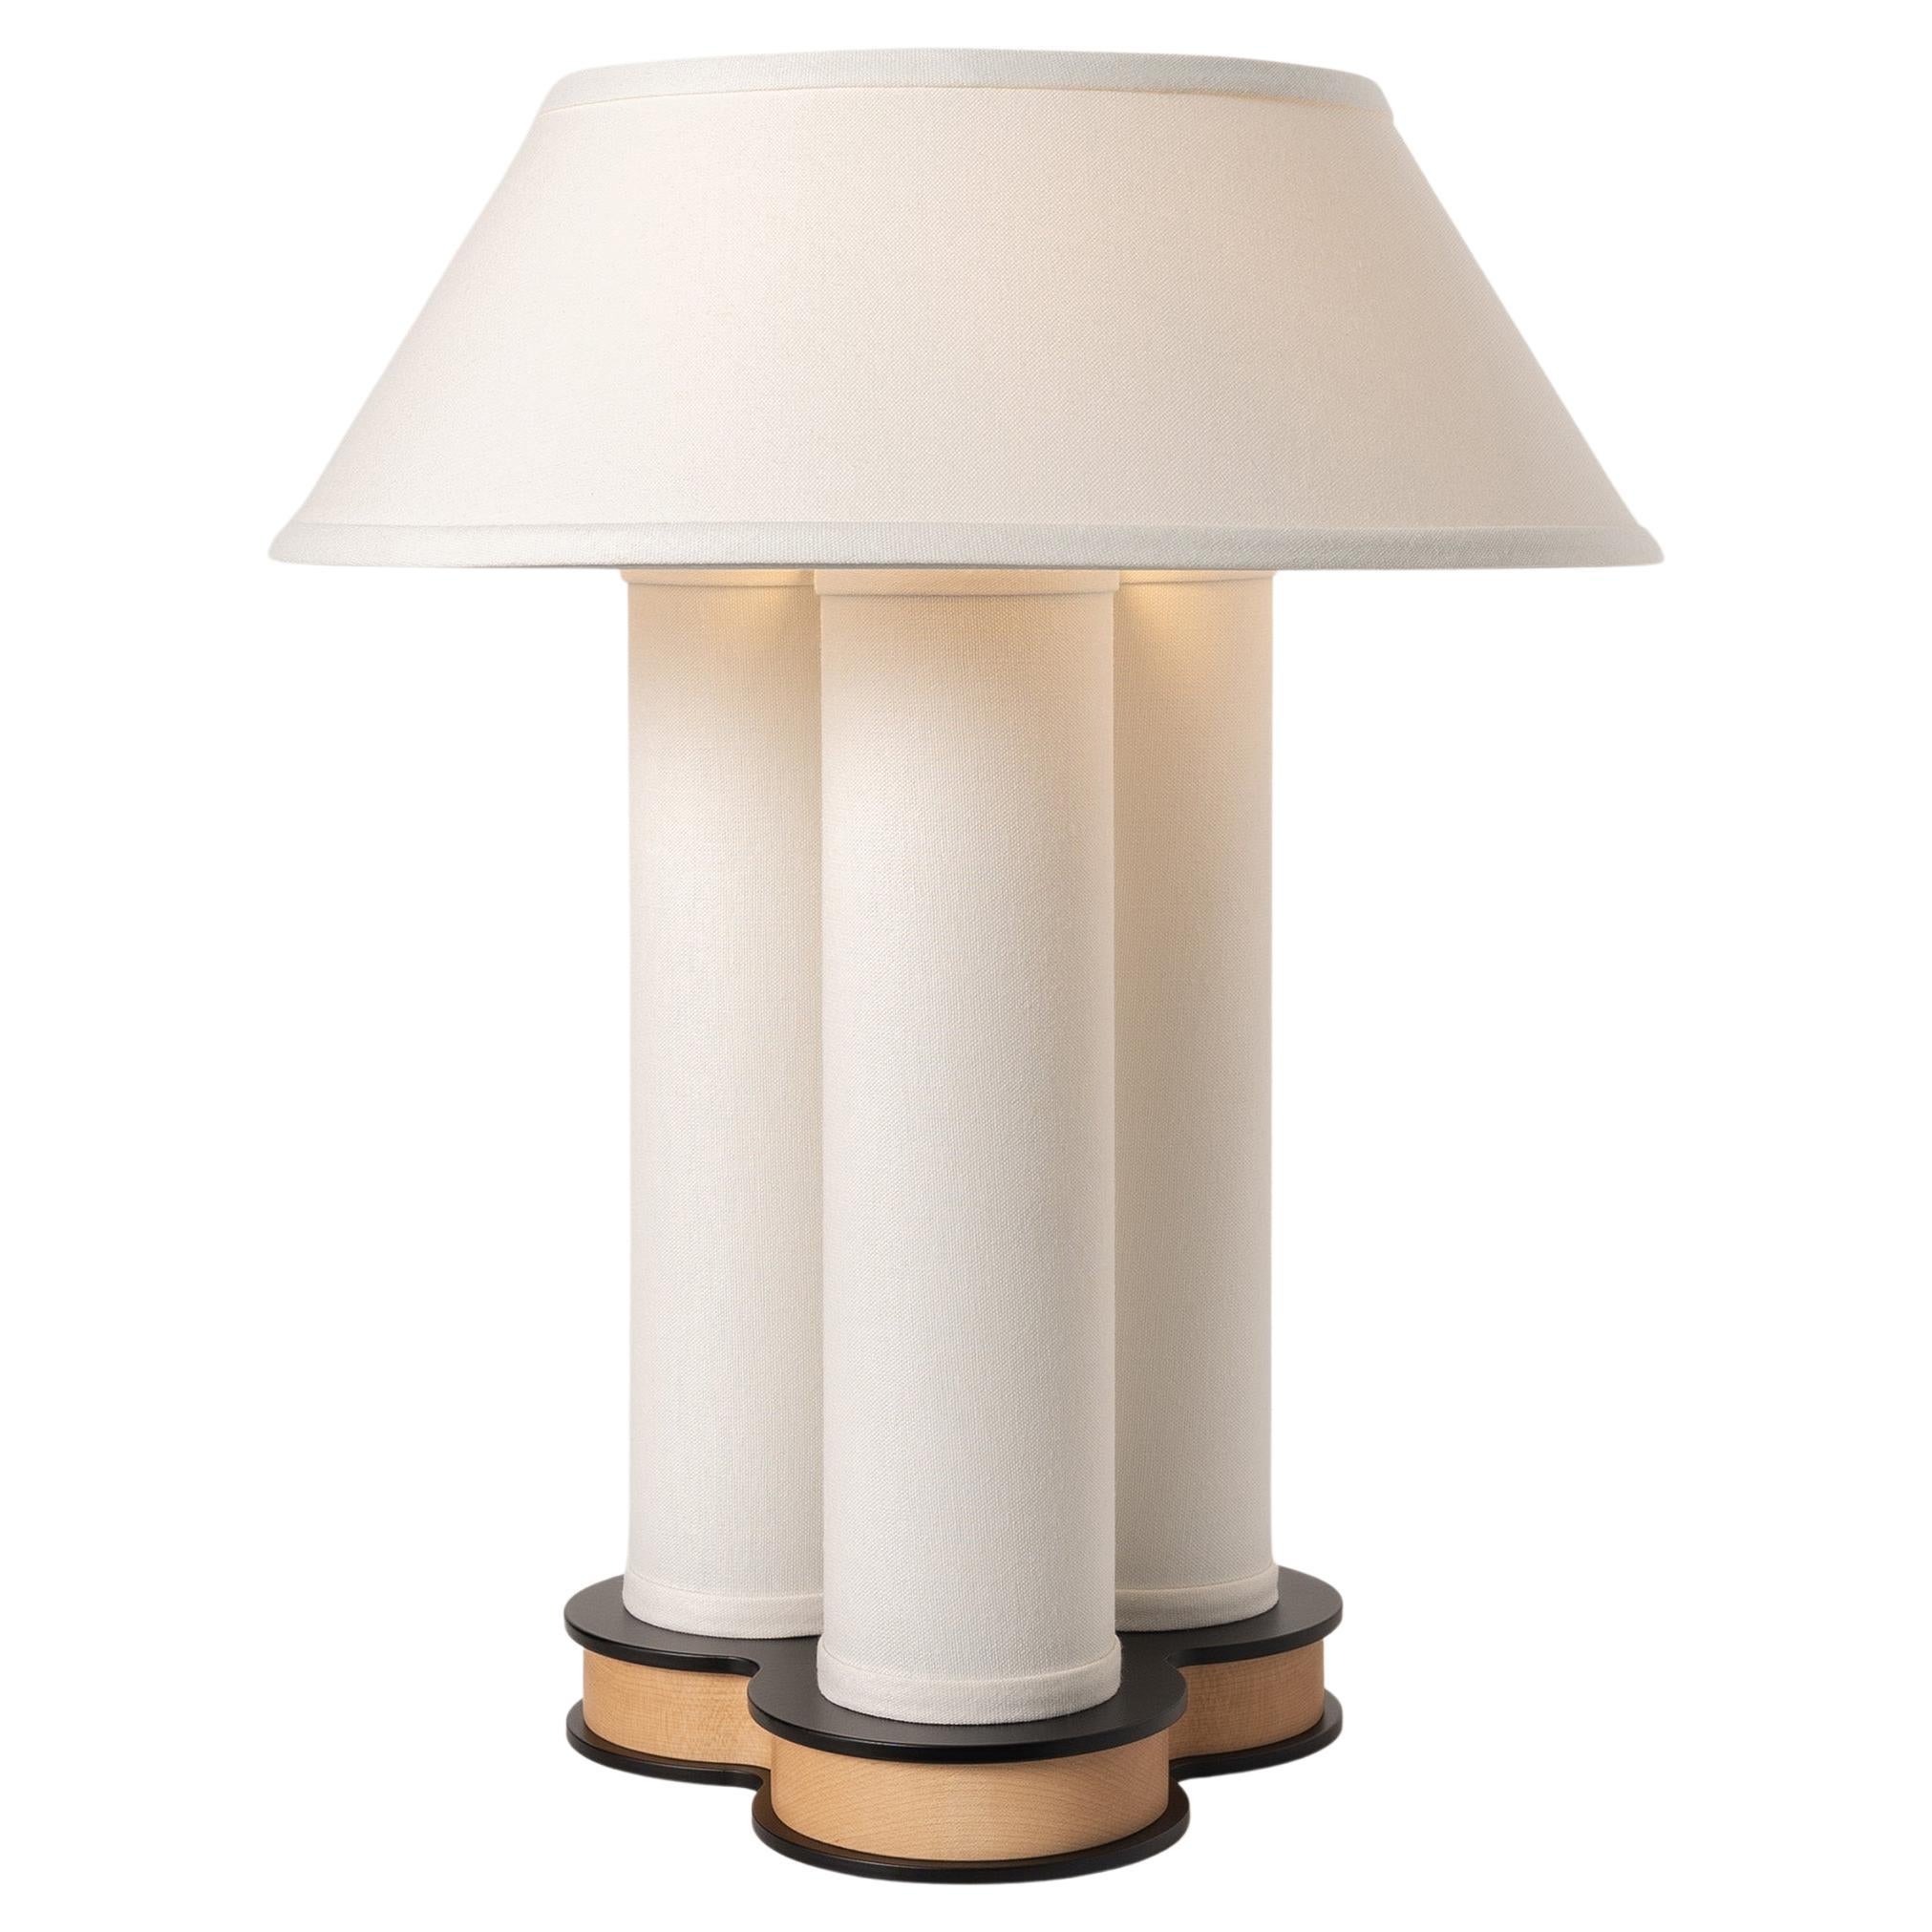 Pillaret Trio 18in Table Lamp by Studio Dunn For Sale